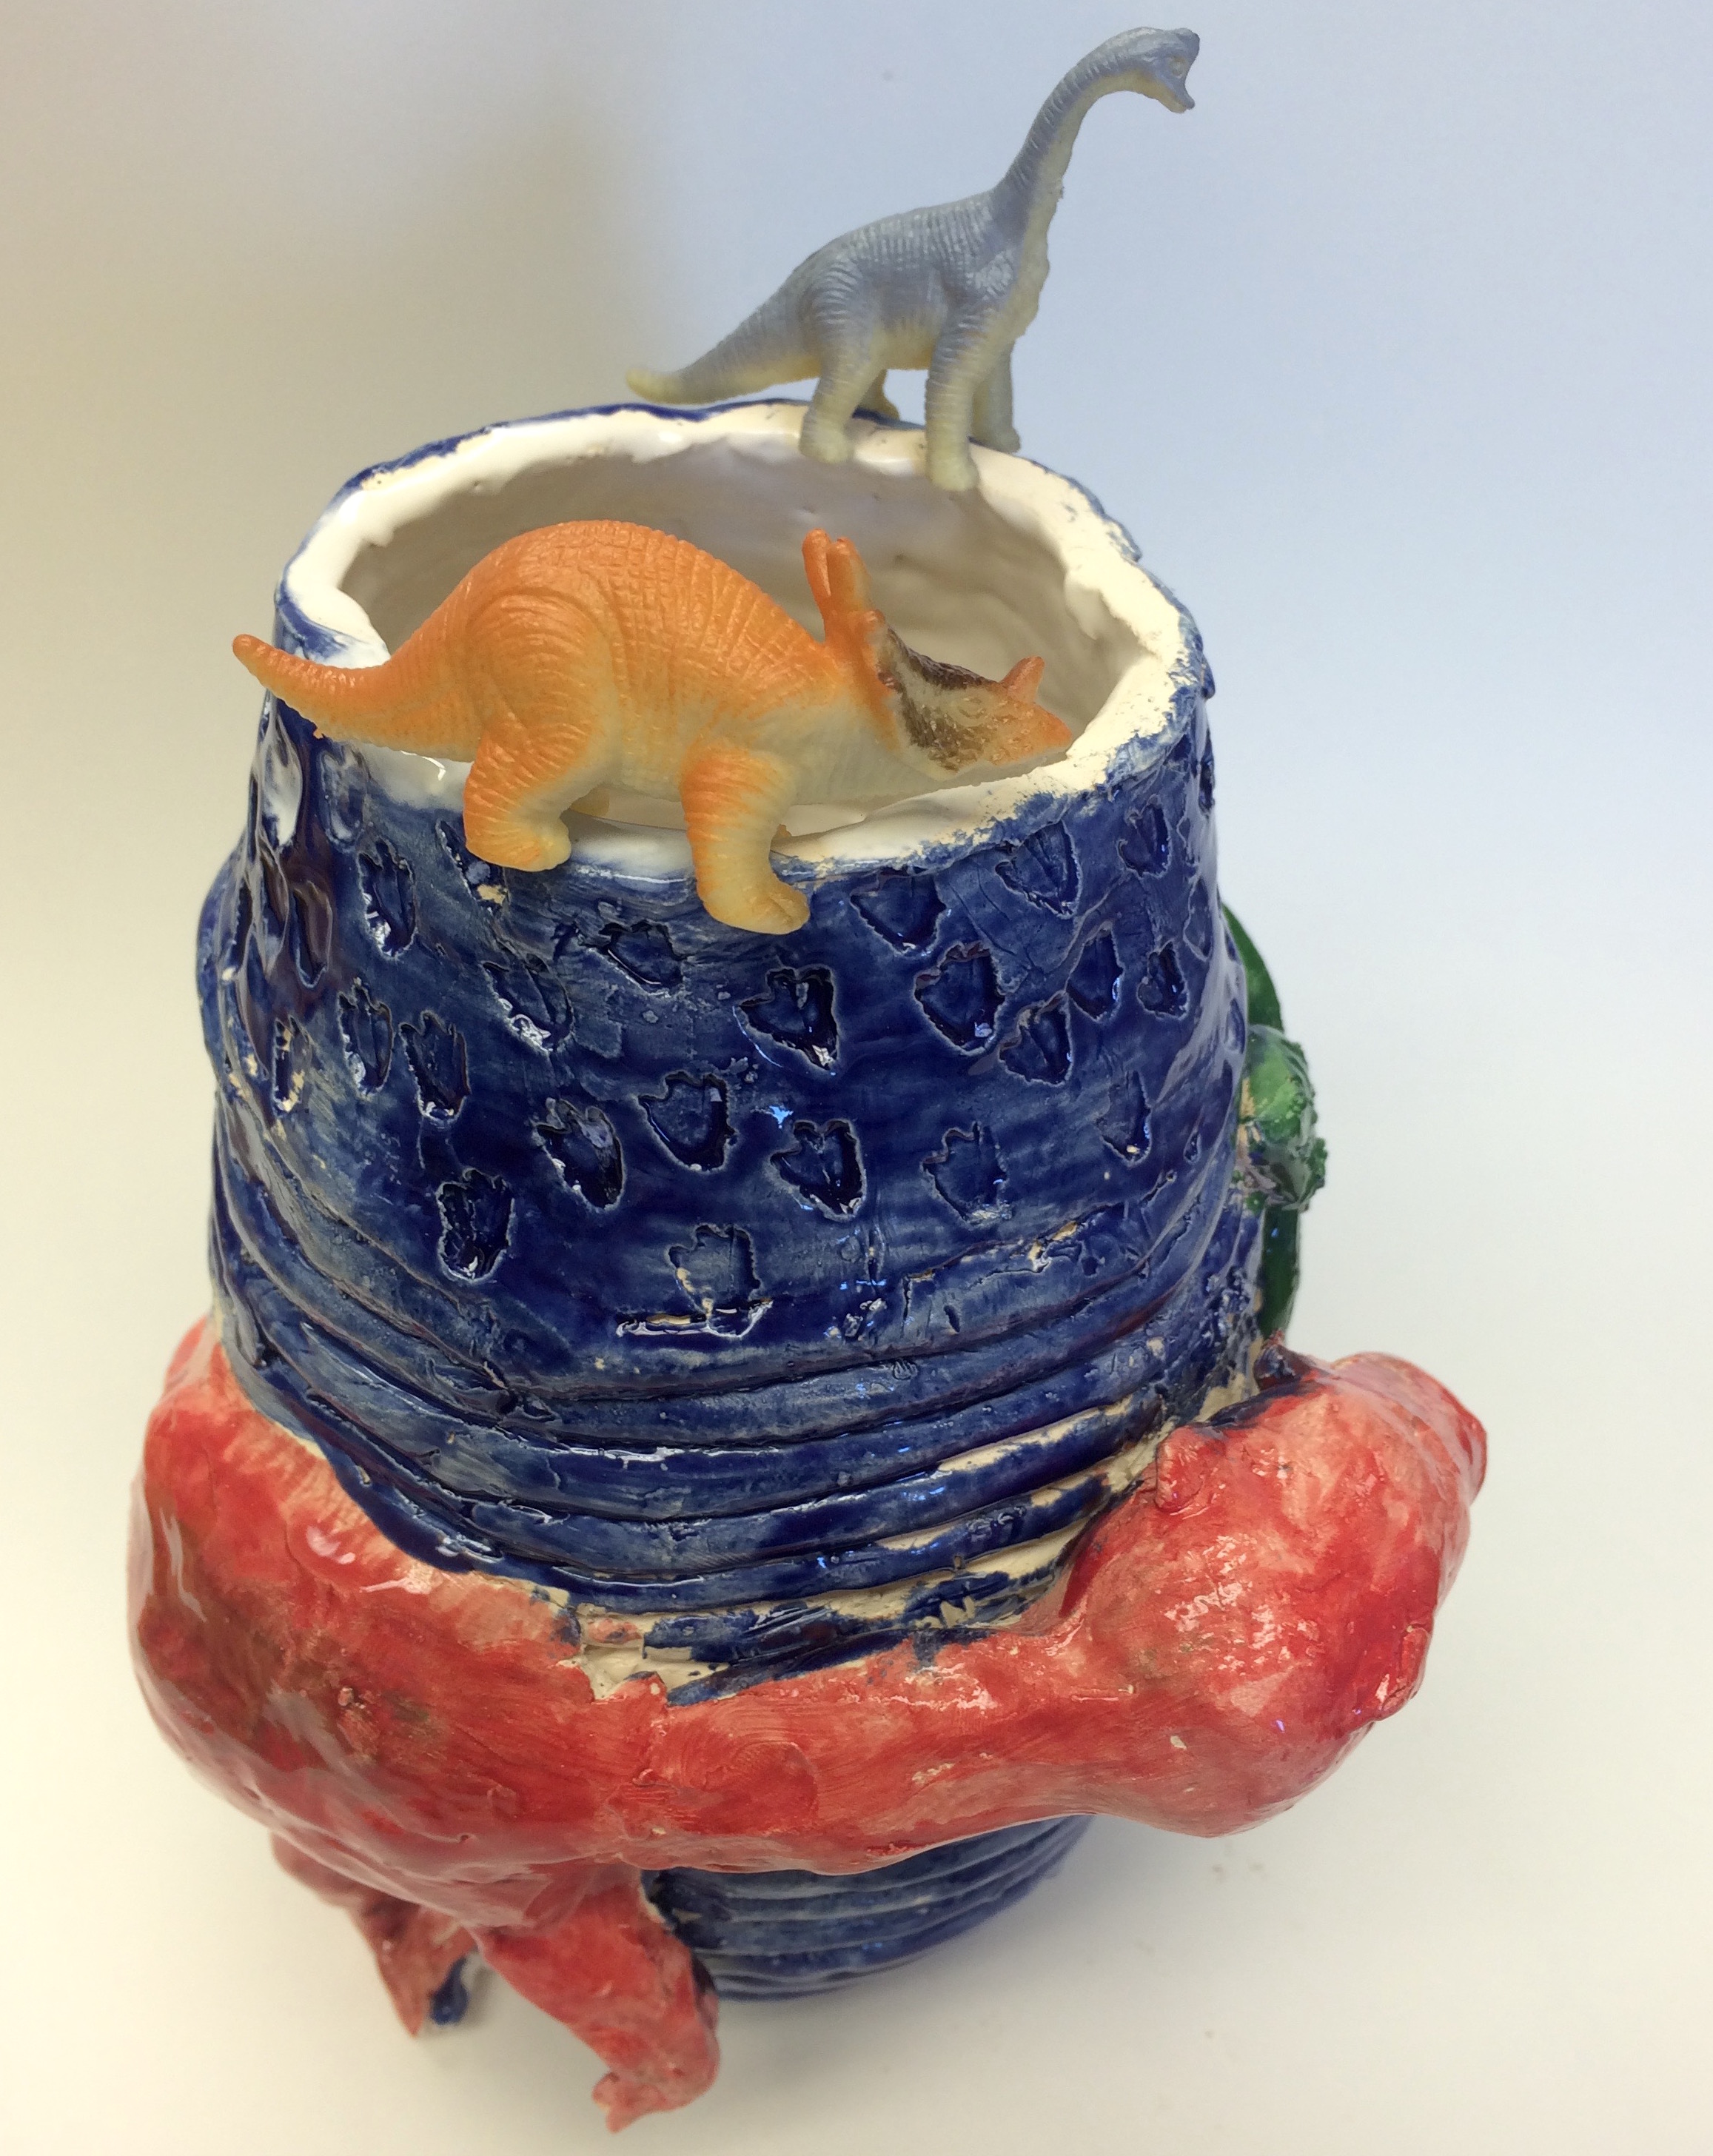 dinosaurs sitting on top of a ceramic pot